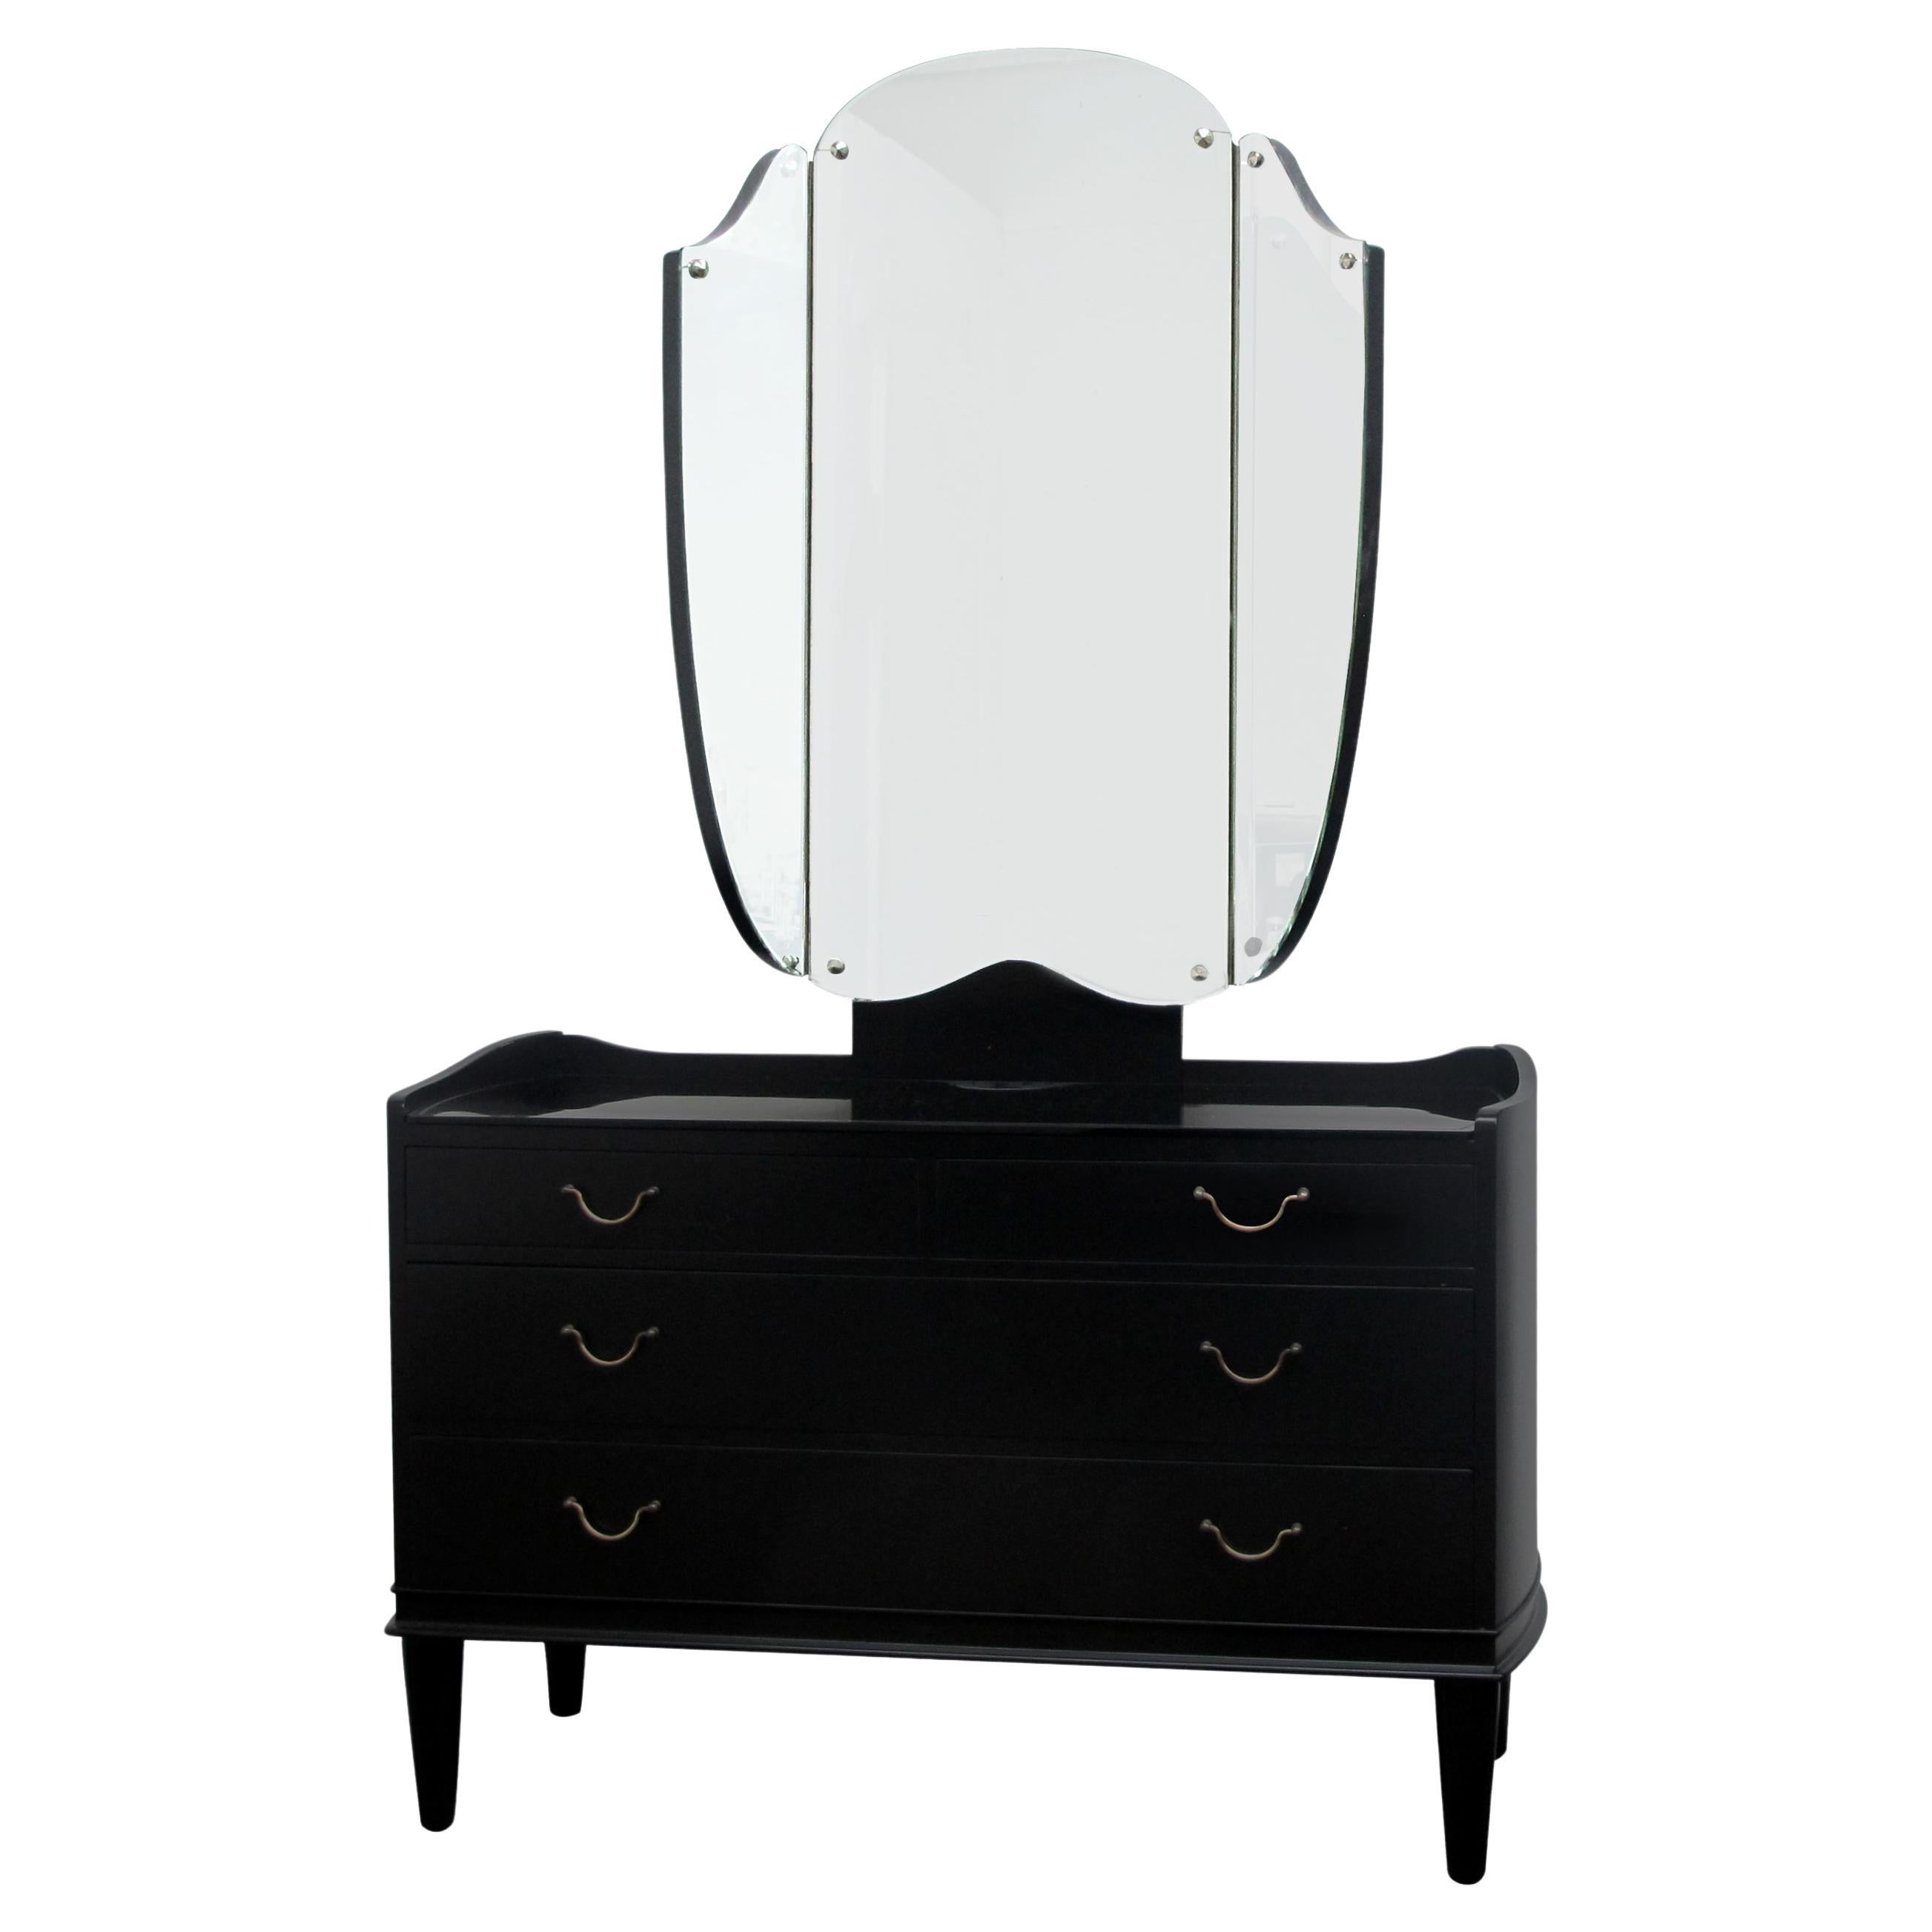 1940s Danish Ebonised Vanity Dressing Table With Triptych Mirror For Sale